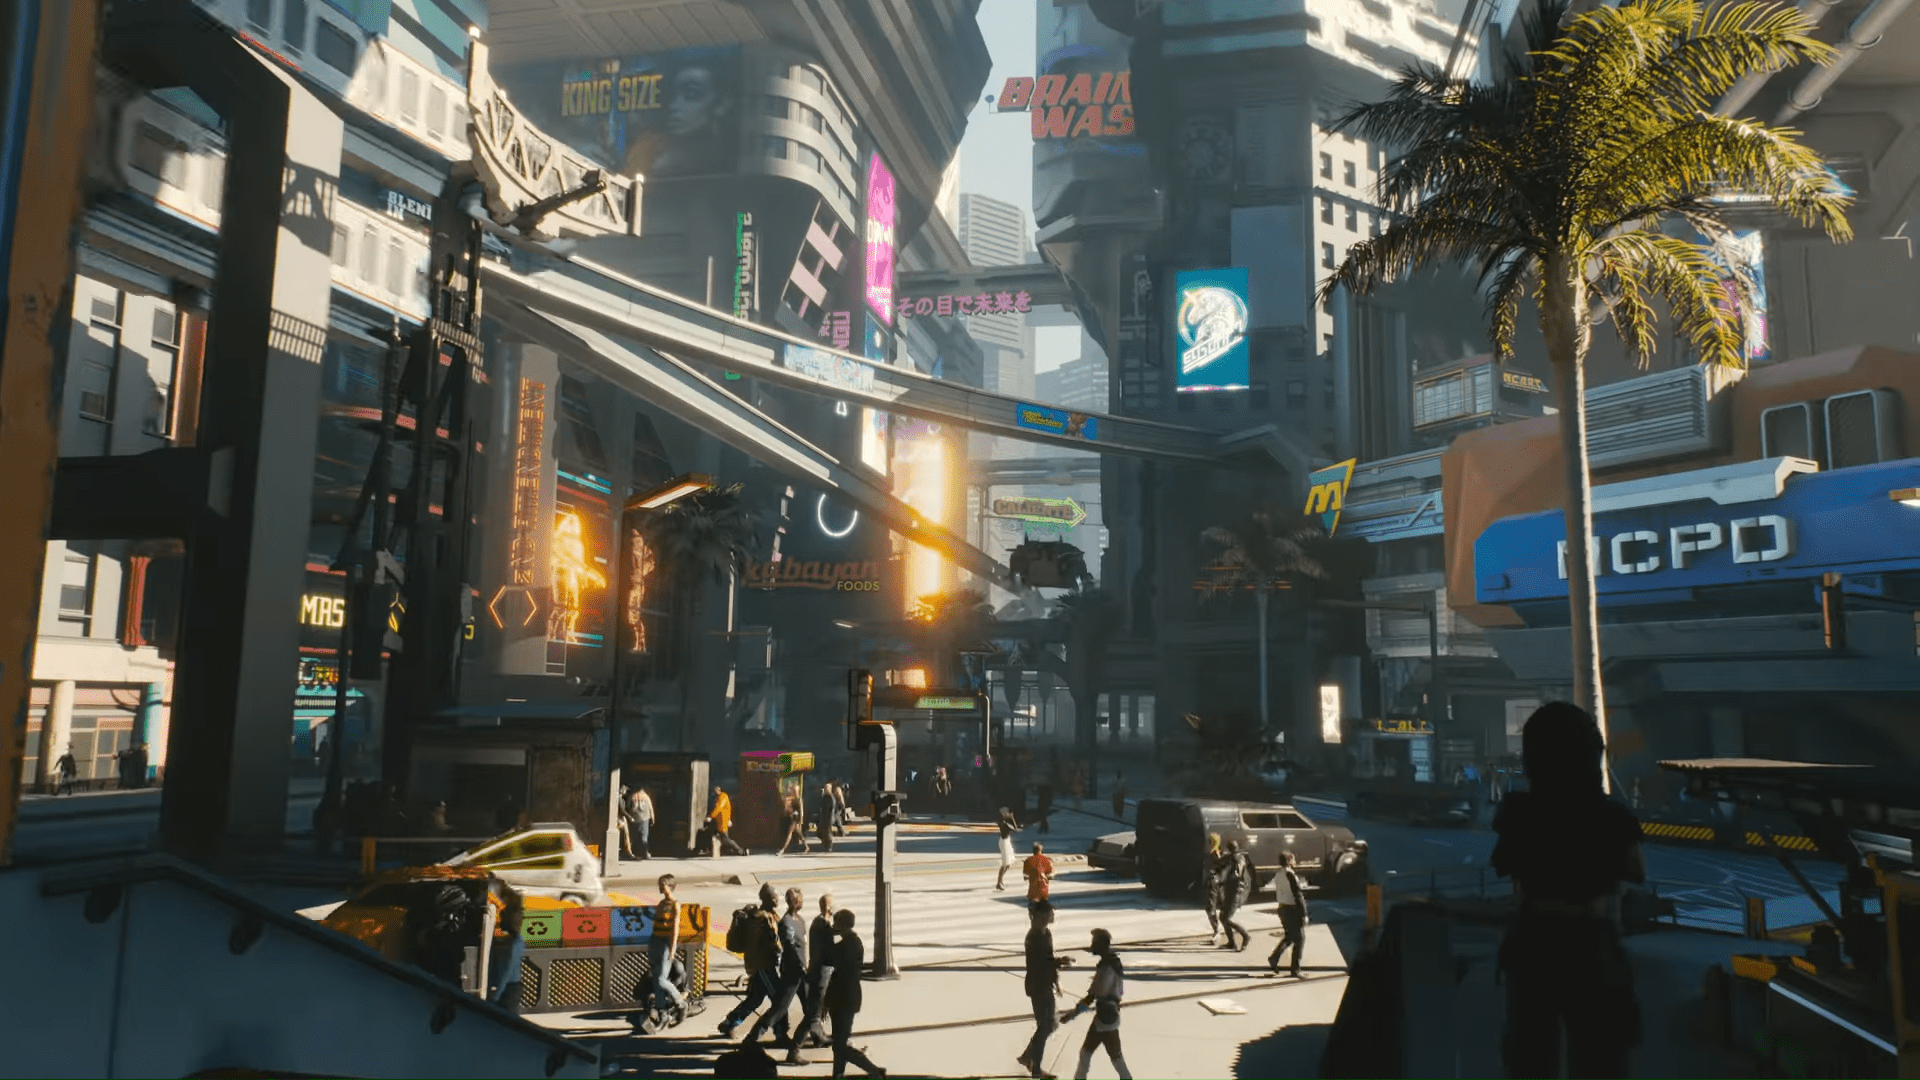 Cyberpunk 2077 Gets A Leak: Box Art And Current-Gen Coming To PS4, Xbox One, PC